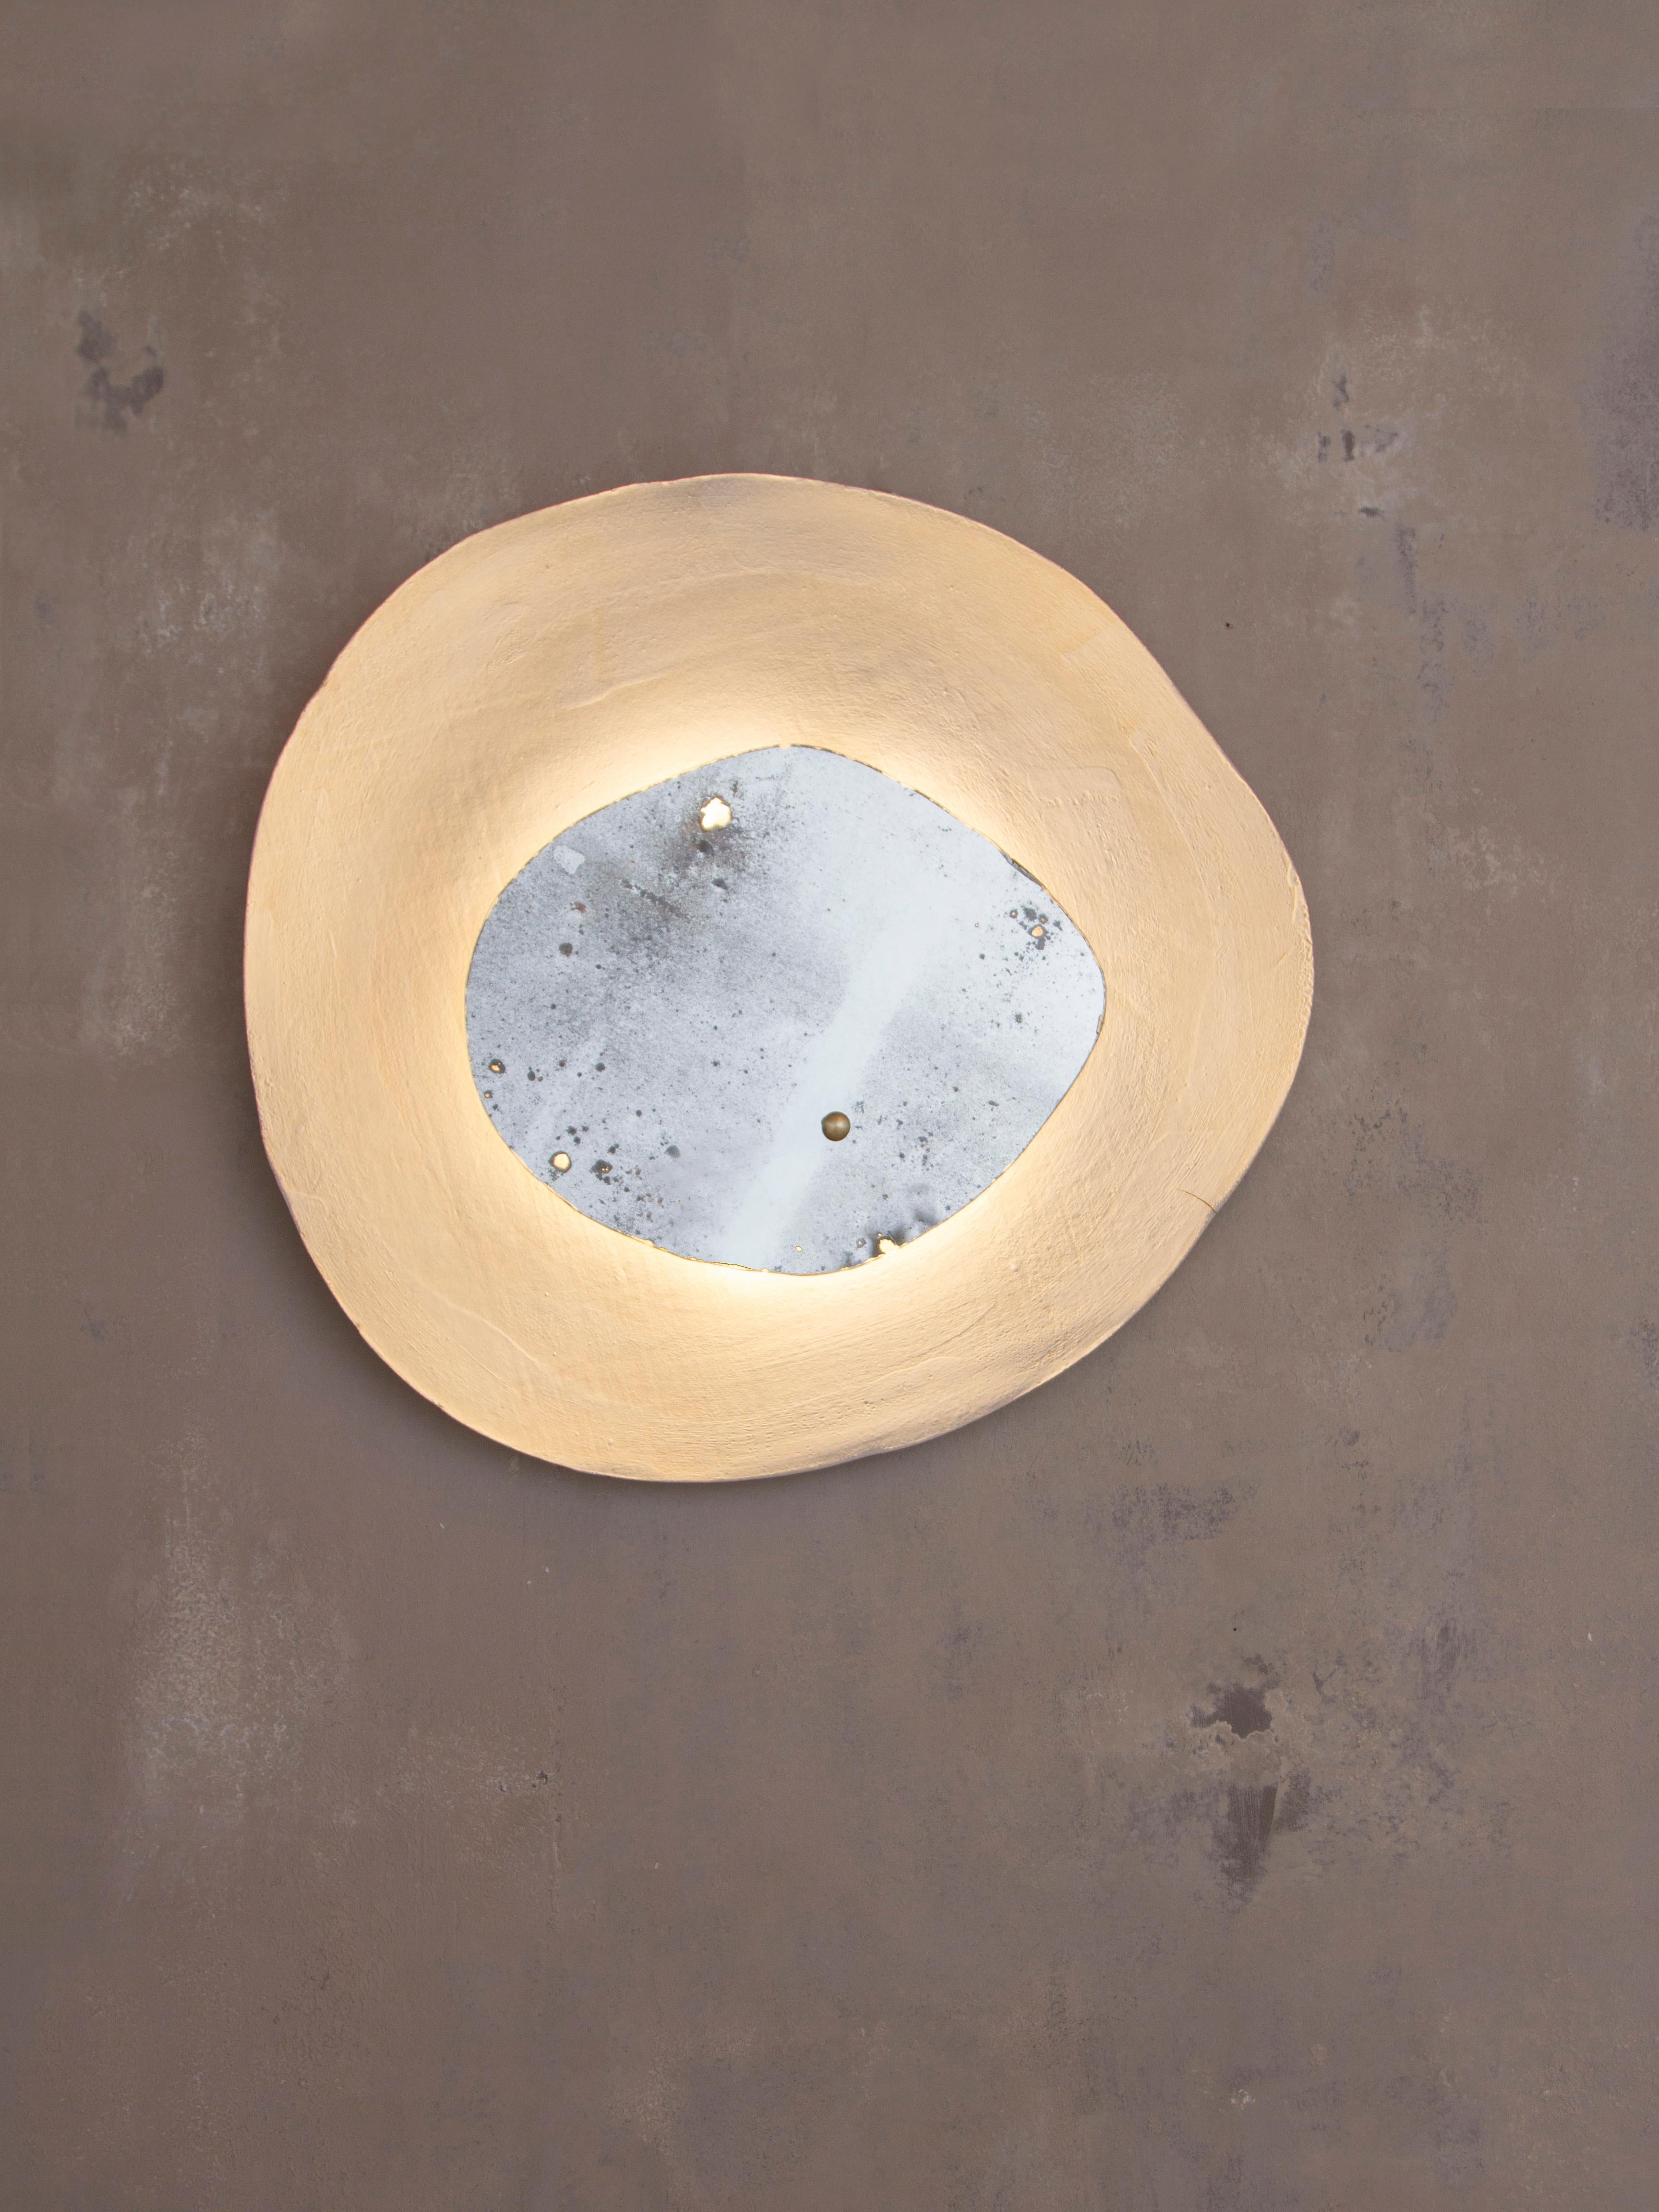 Echo #3 Wall Light by Margaux Leycuras
*One of a Kind, Signed and numbered*
Dimensions: D 6 x W 56 x H 53 cm.
Material: Ceramic, sand stoneware top with a porcelain engobe finish and old mercury mirror.
The piece is signed, numbered, and delivered